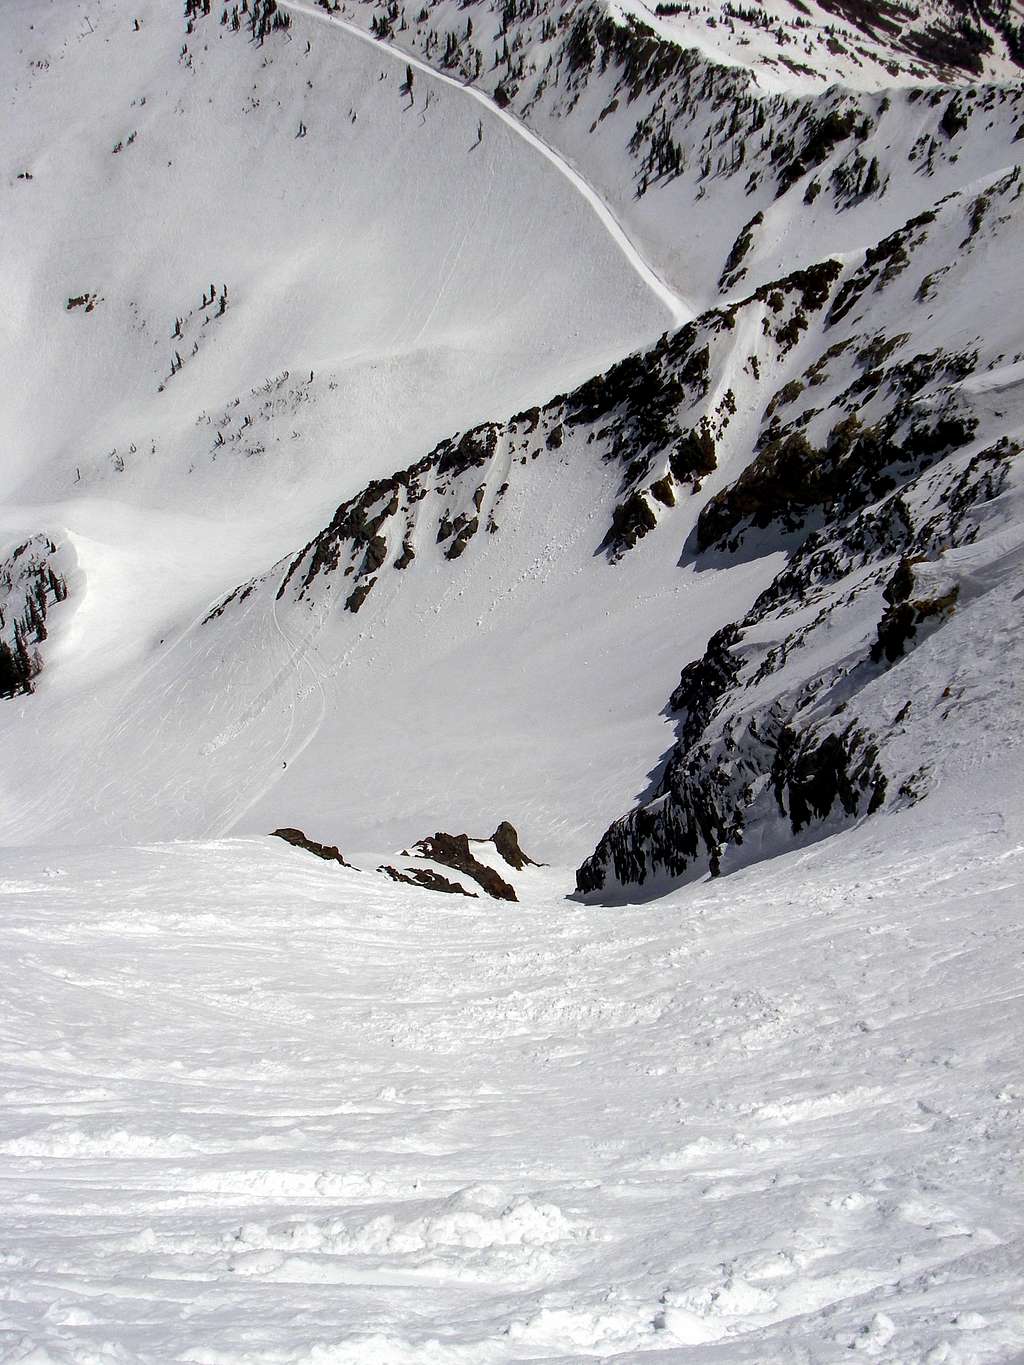 The Pipeline Couloir